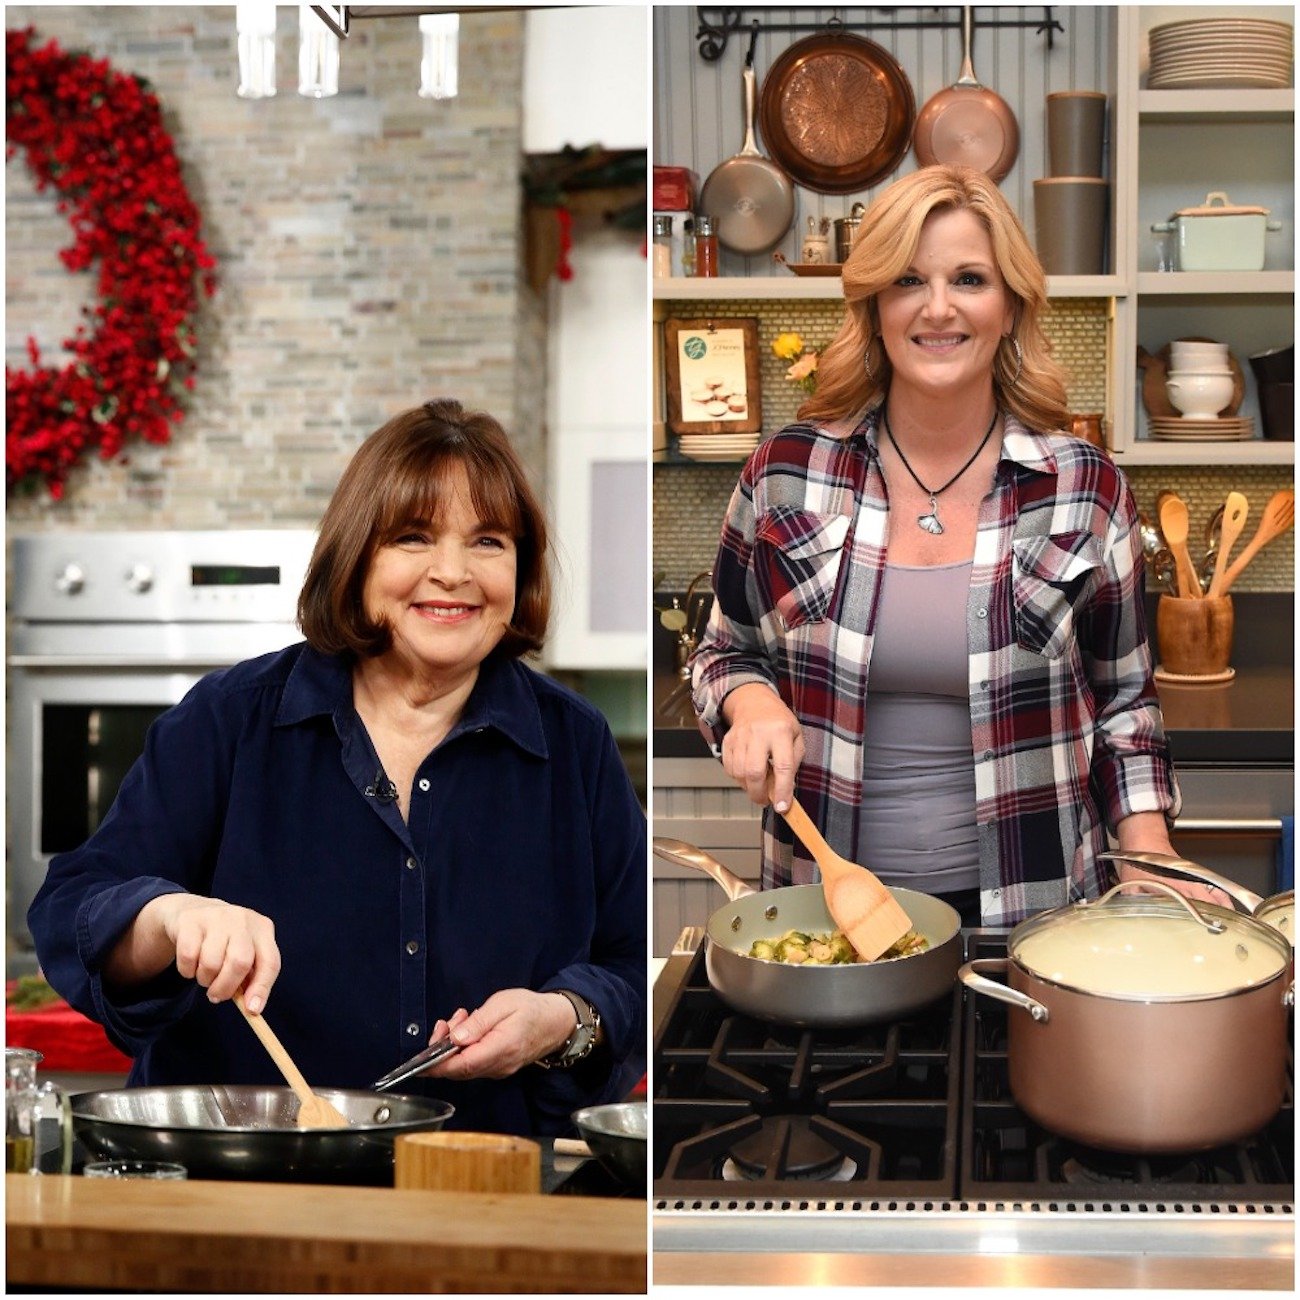 Ina Garten smiles as she stands at a stove; Trisha Yearwood smiles as she stands at stove